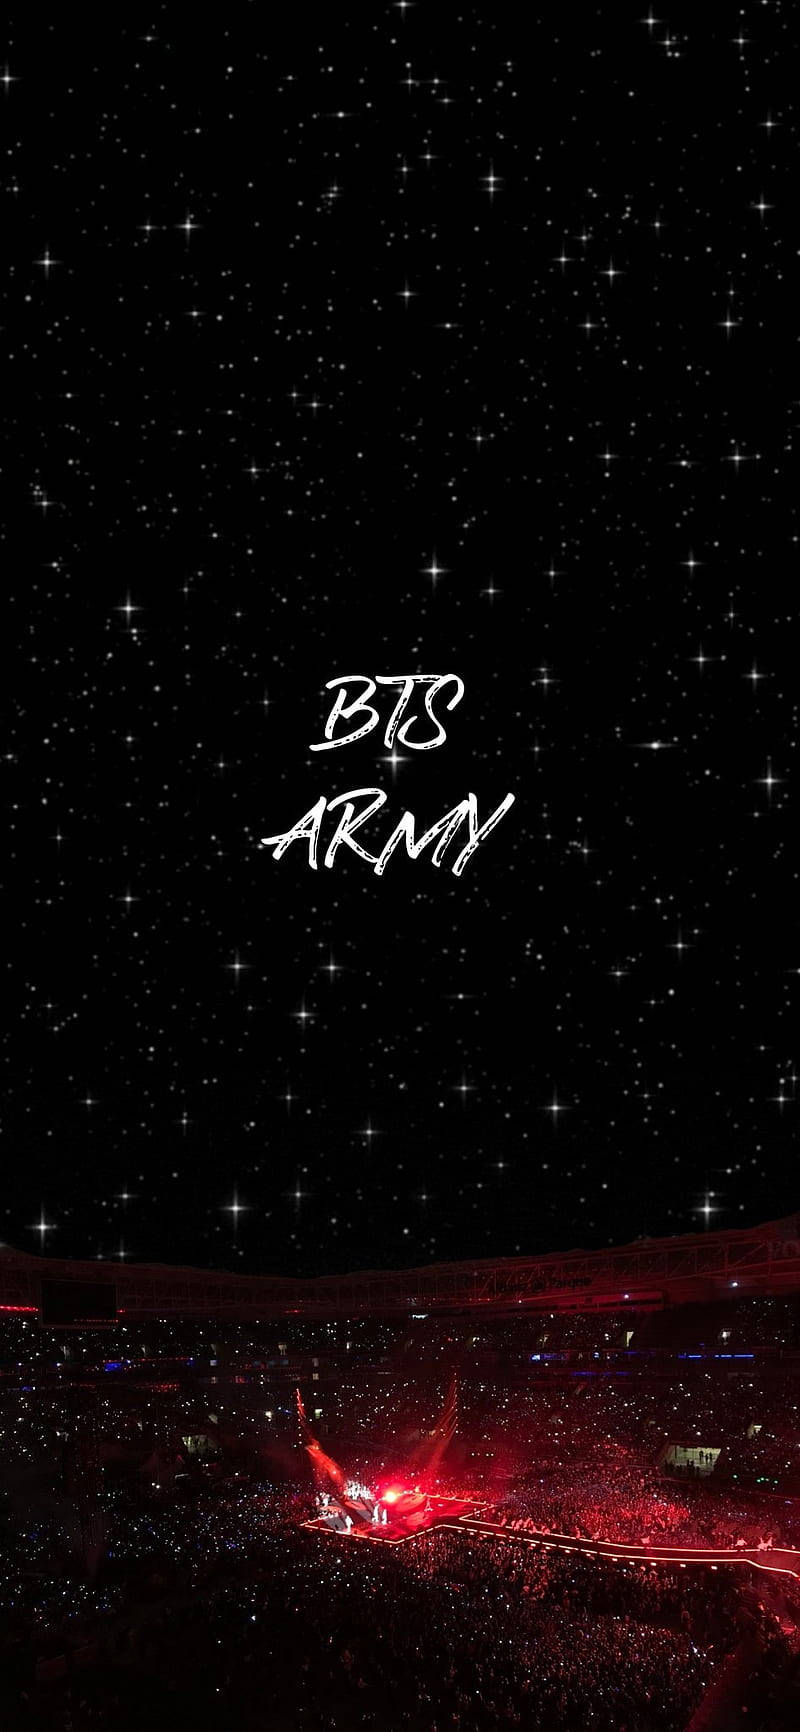 Bts Concert With The Words Bts And Army Background